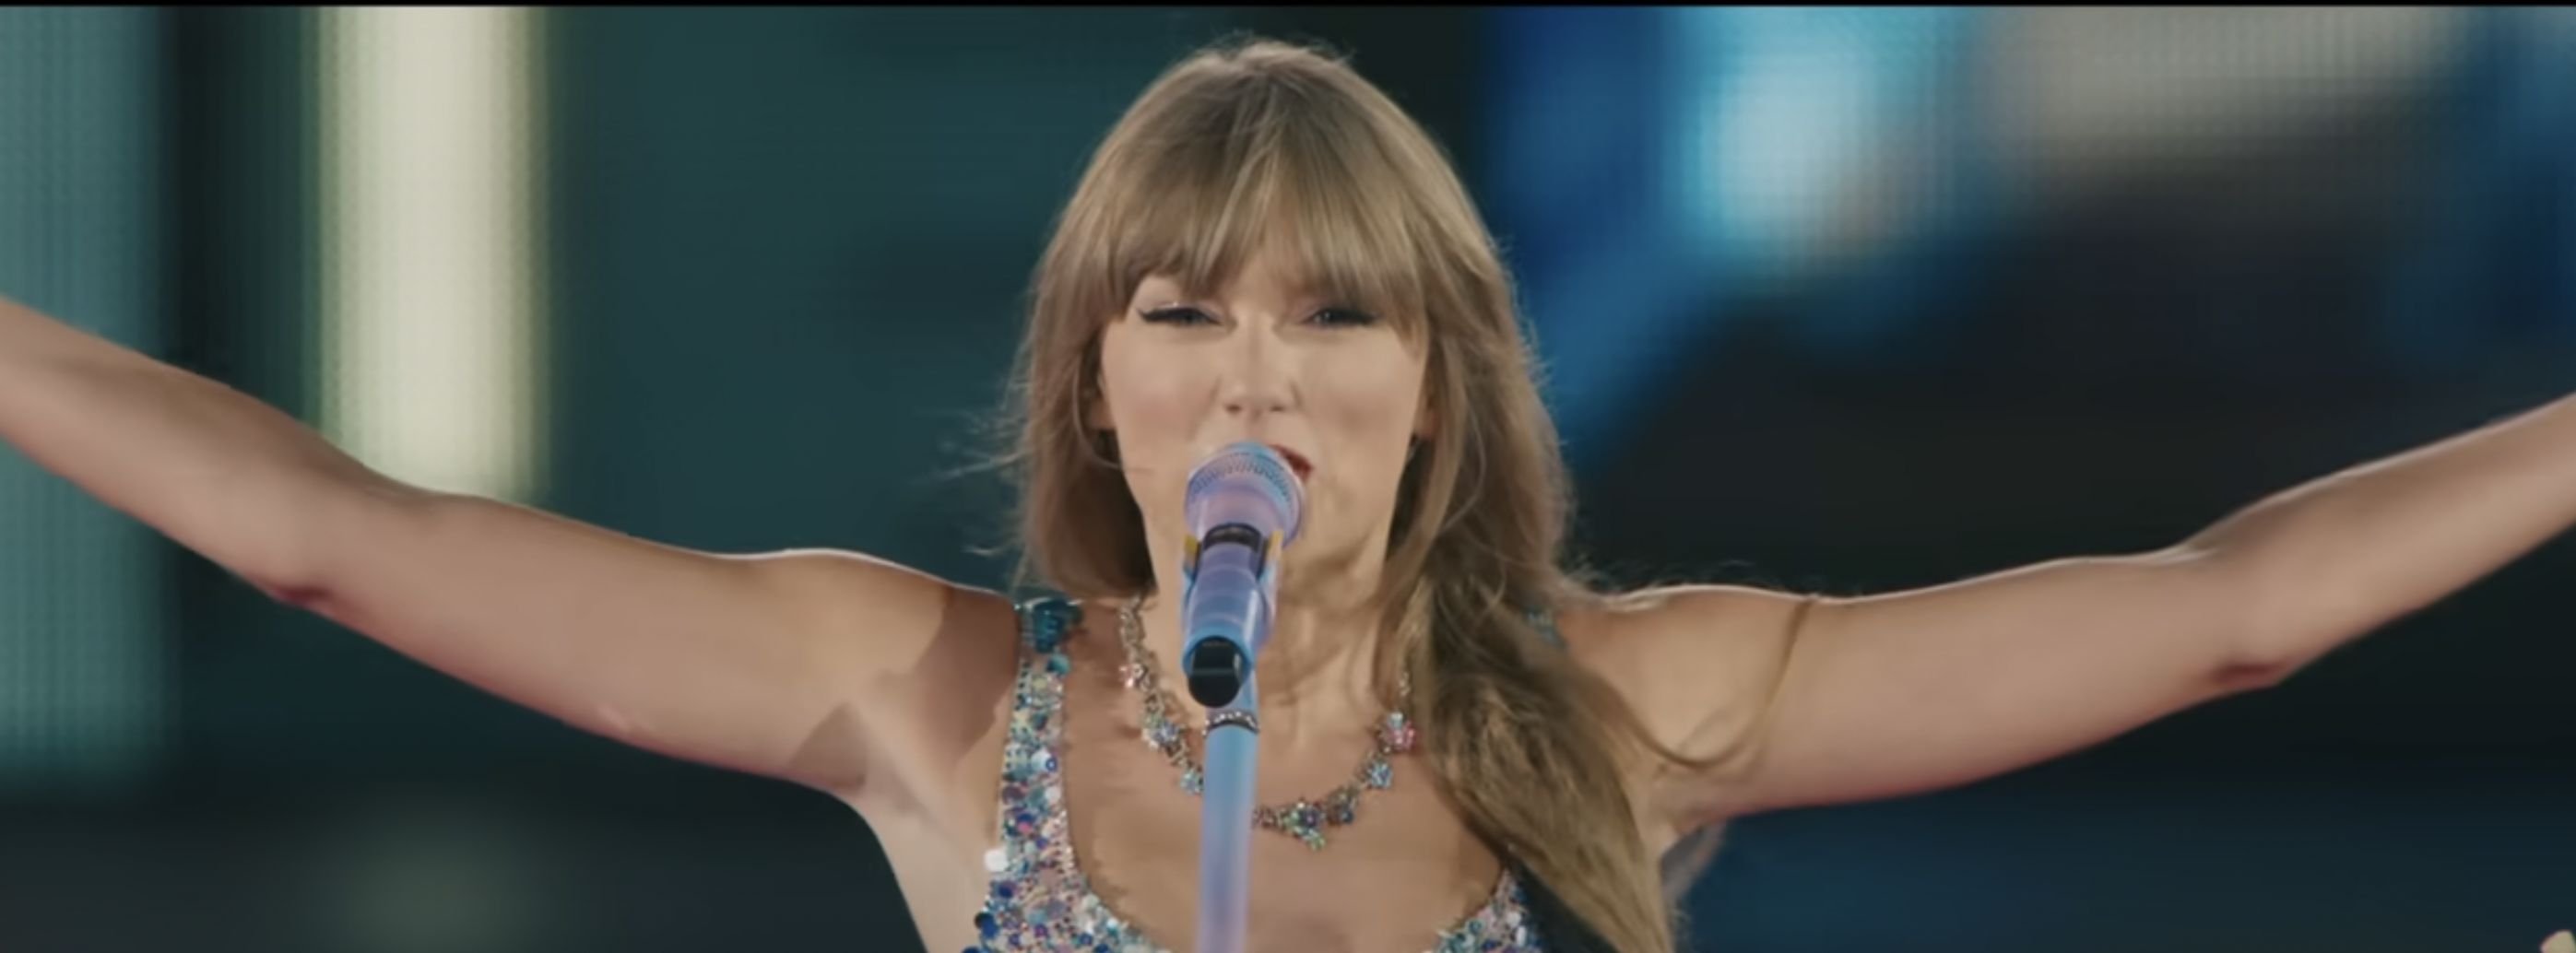 Video Of Taylor Swift Goes Viral After Fans Spot ‘Baby Bump’